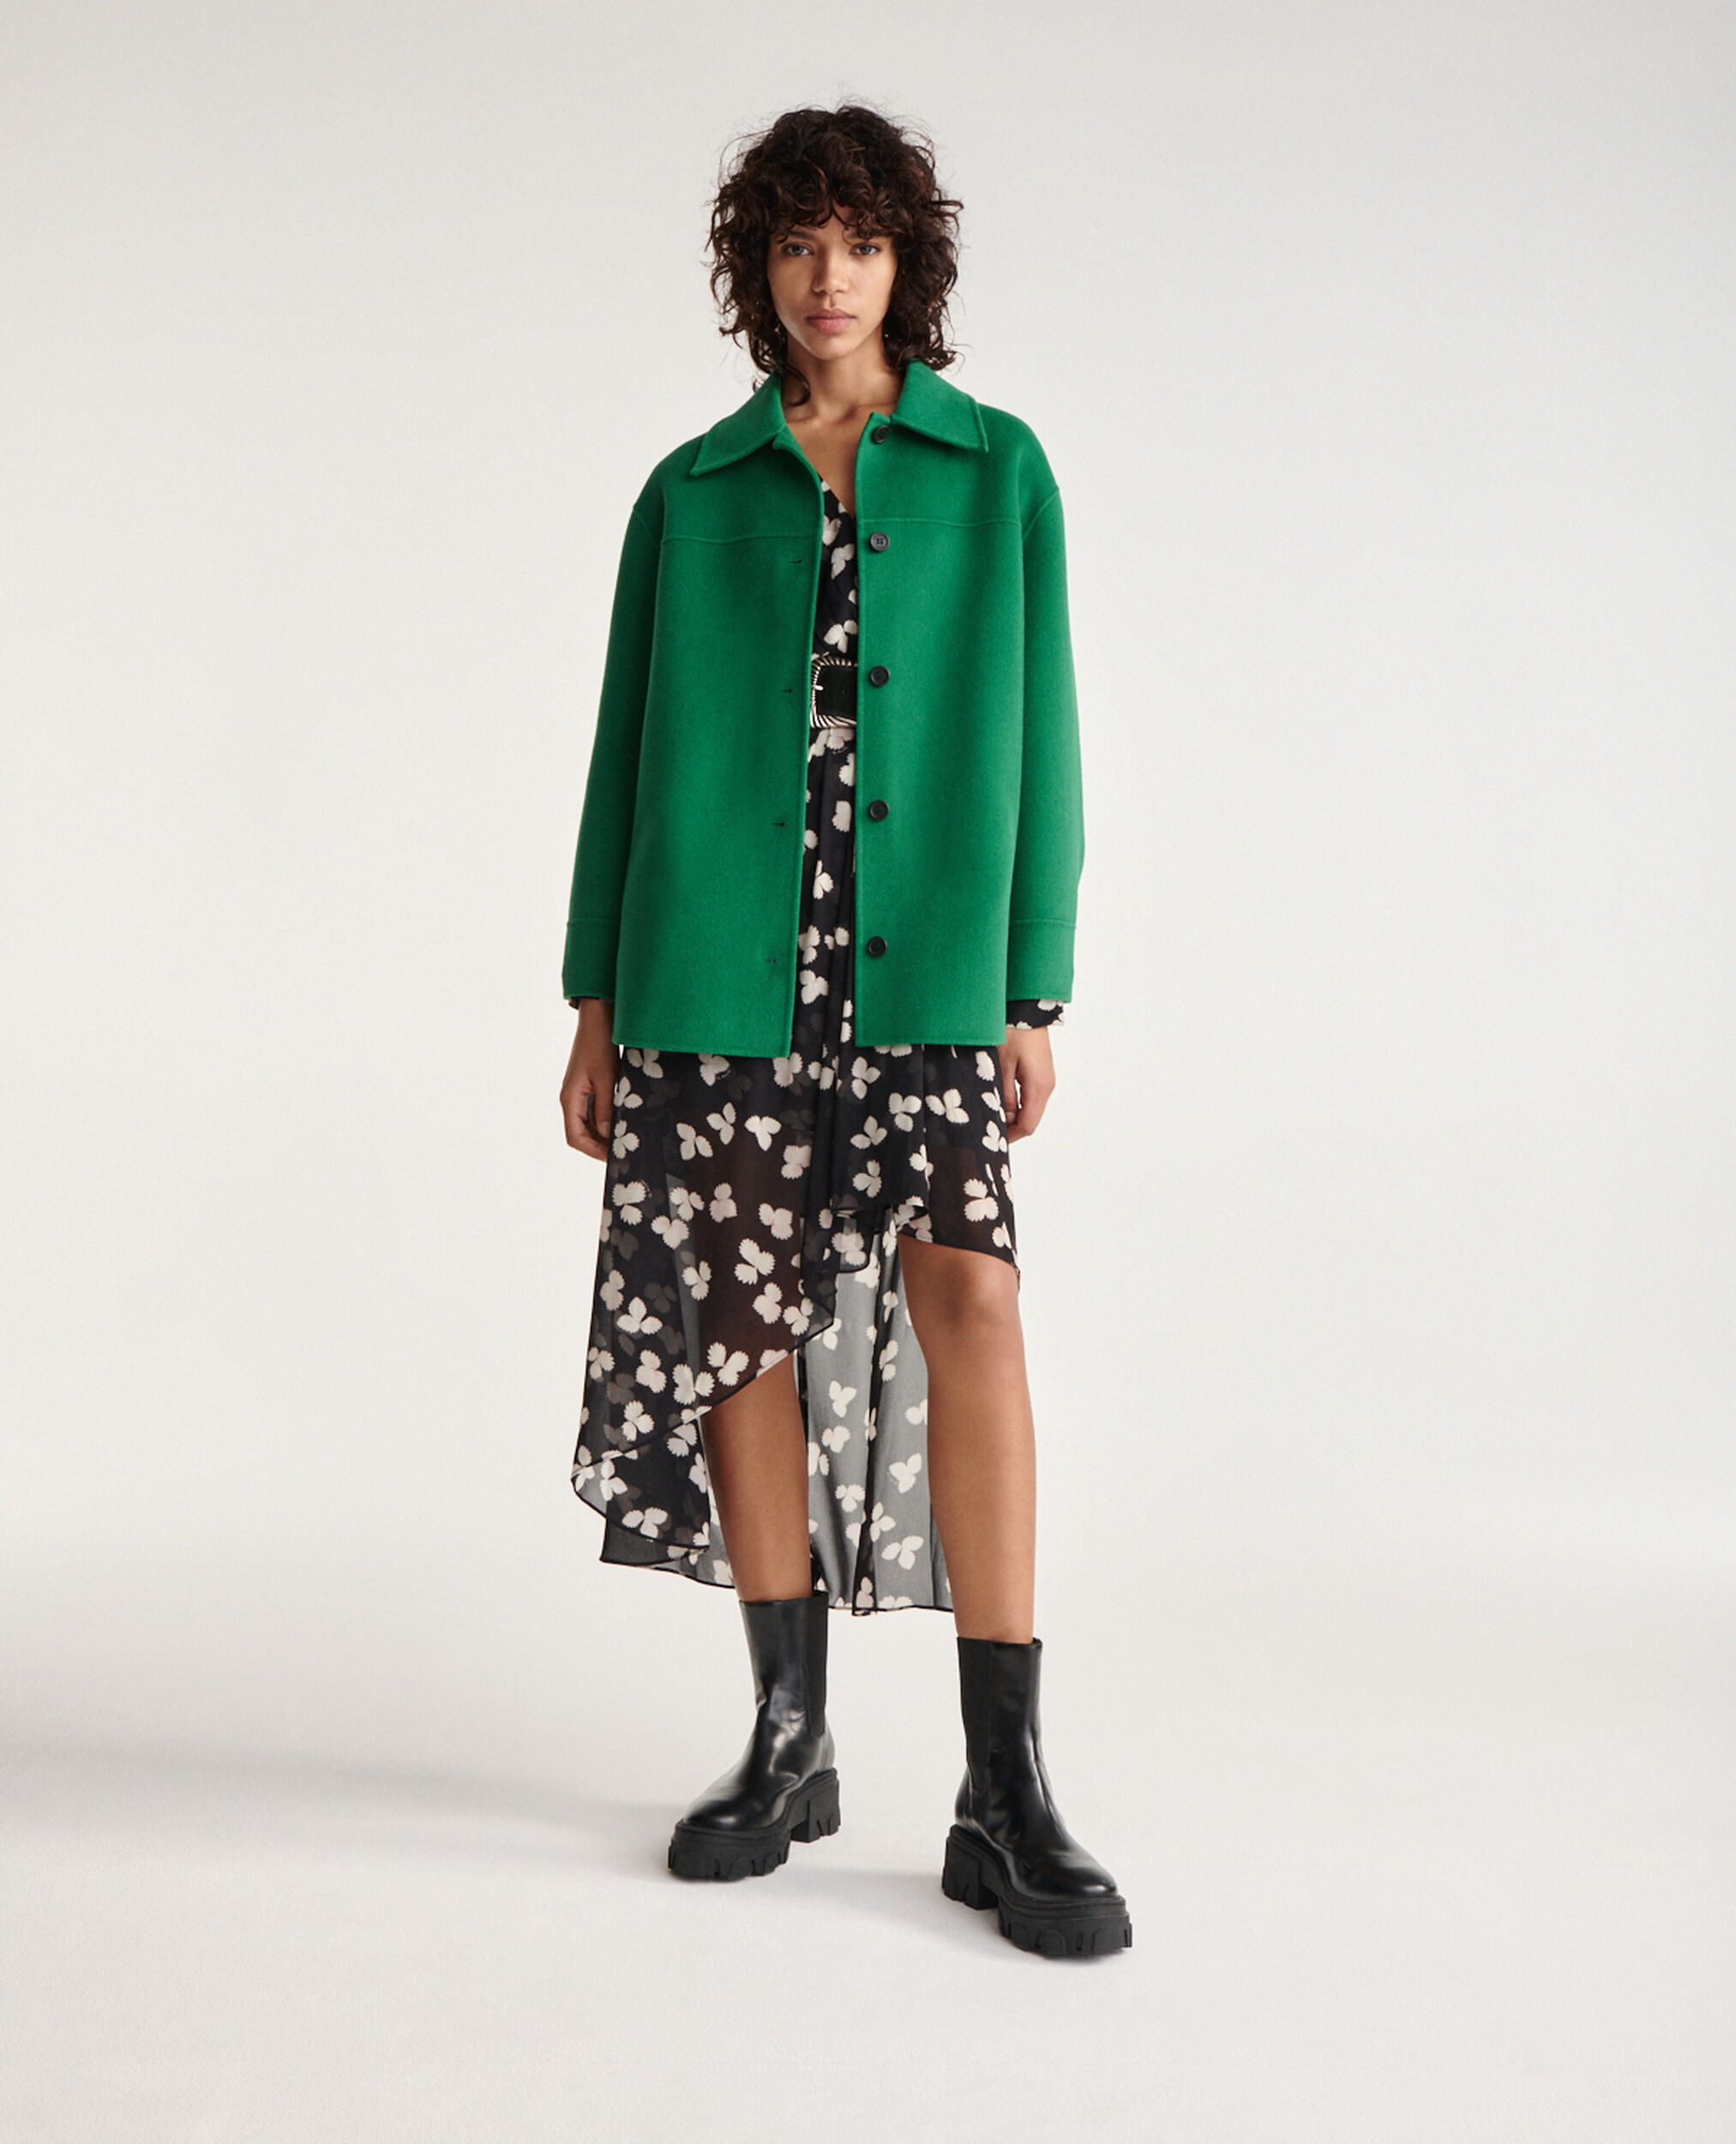 Overshirt-style green wool jacket, APPLE, hi-res image number null